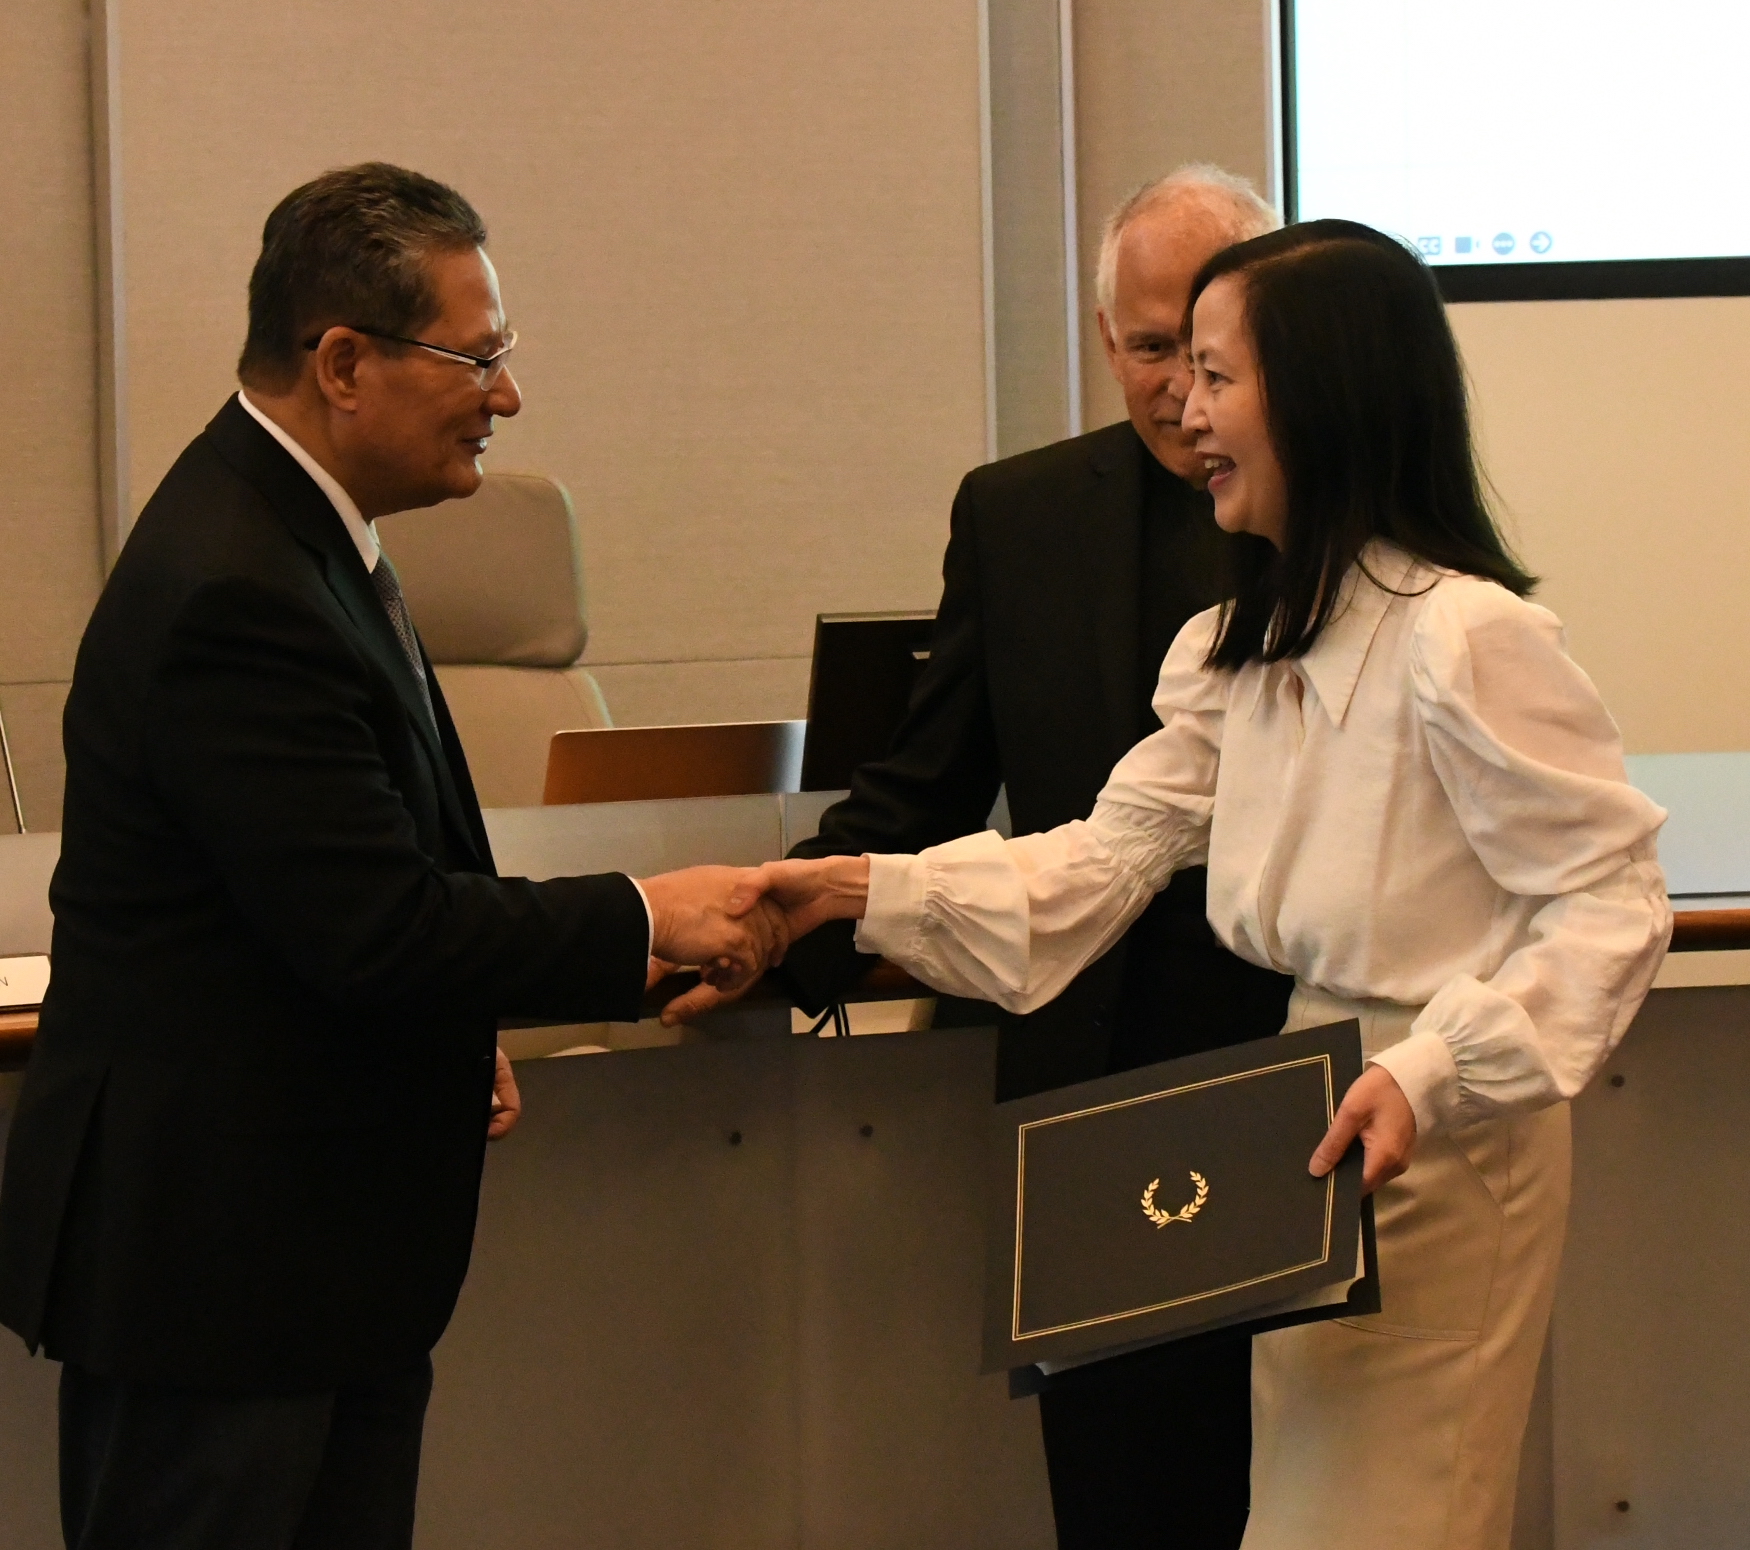 Chancellor Lambert shaking hands with Catherina Wong as Trustee Landsberger looks on